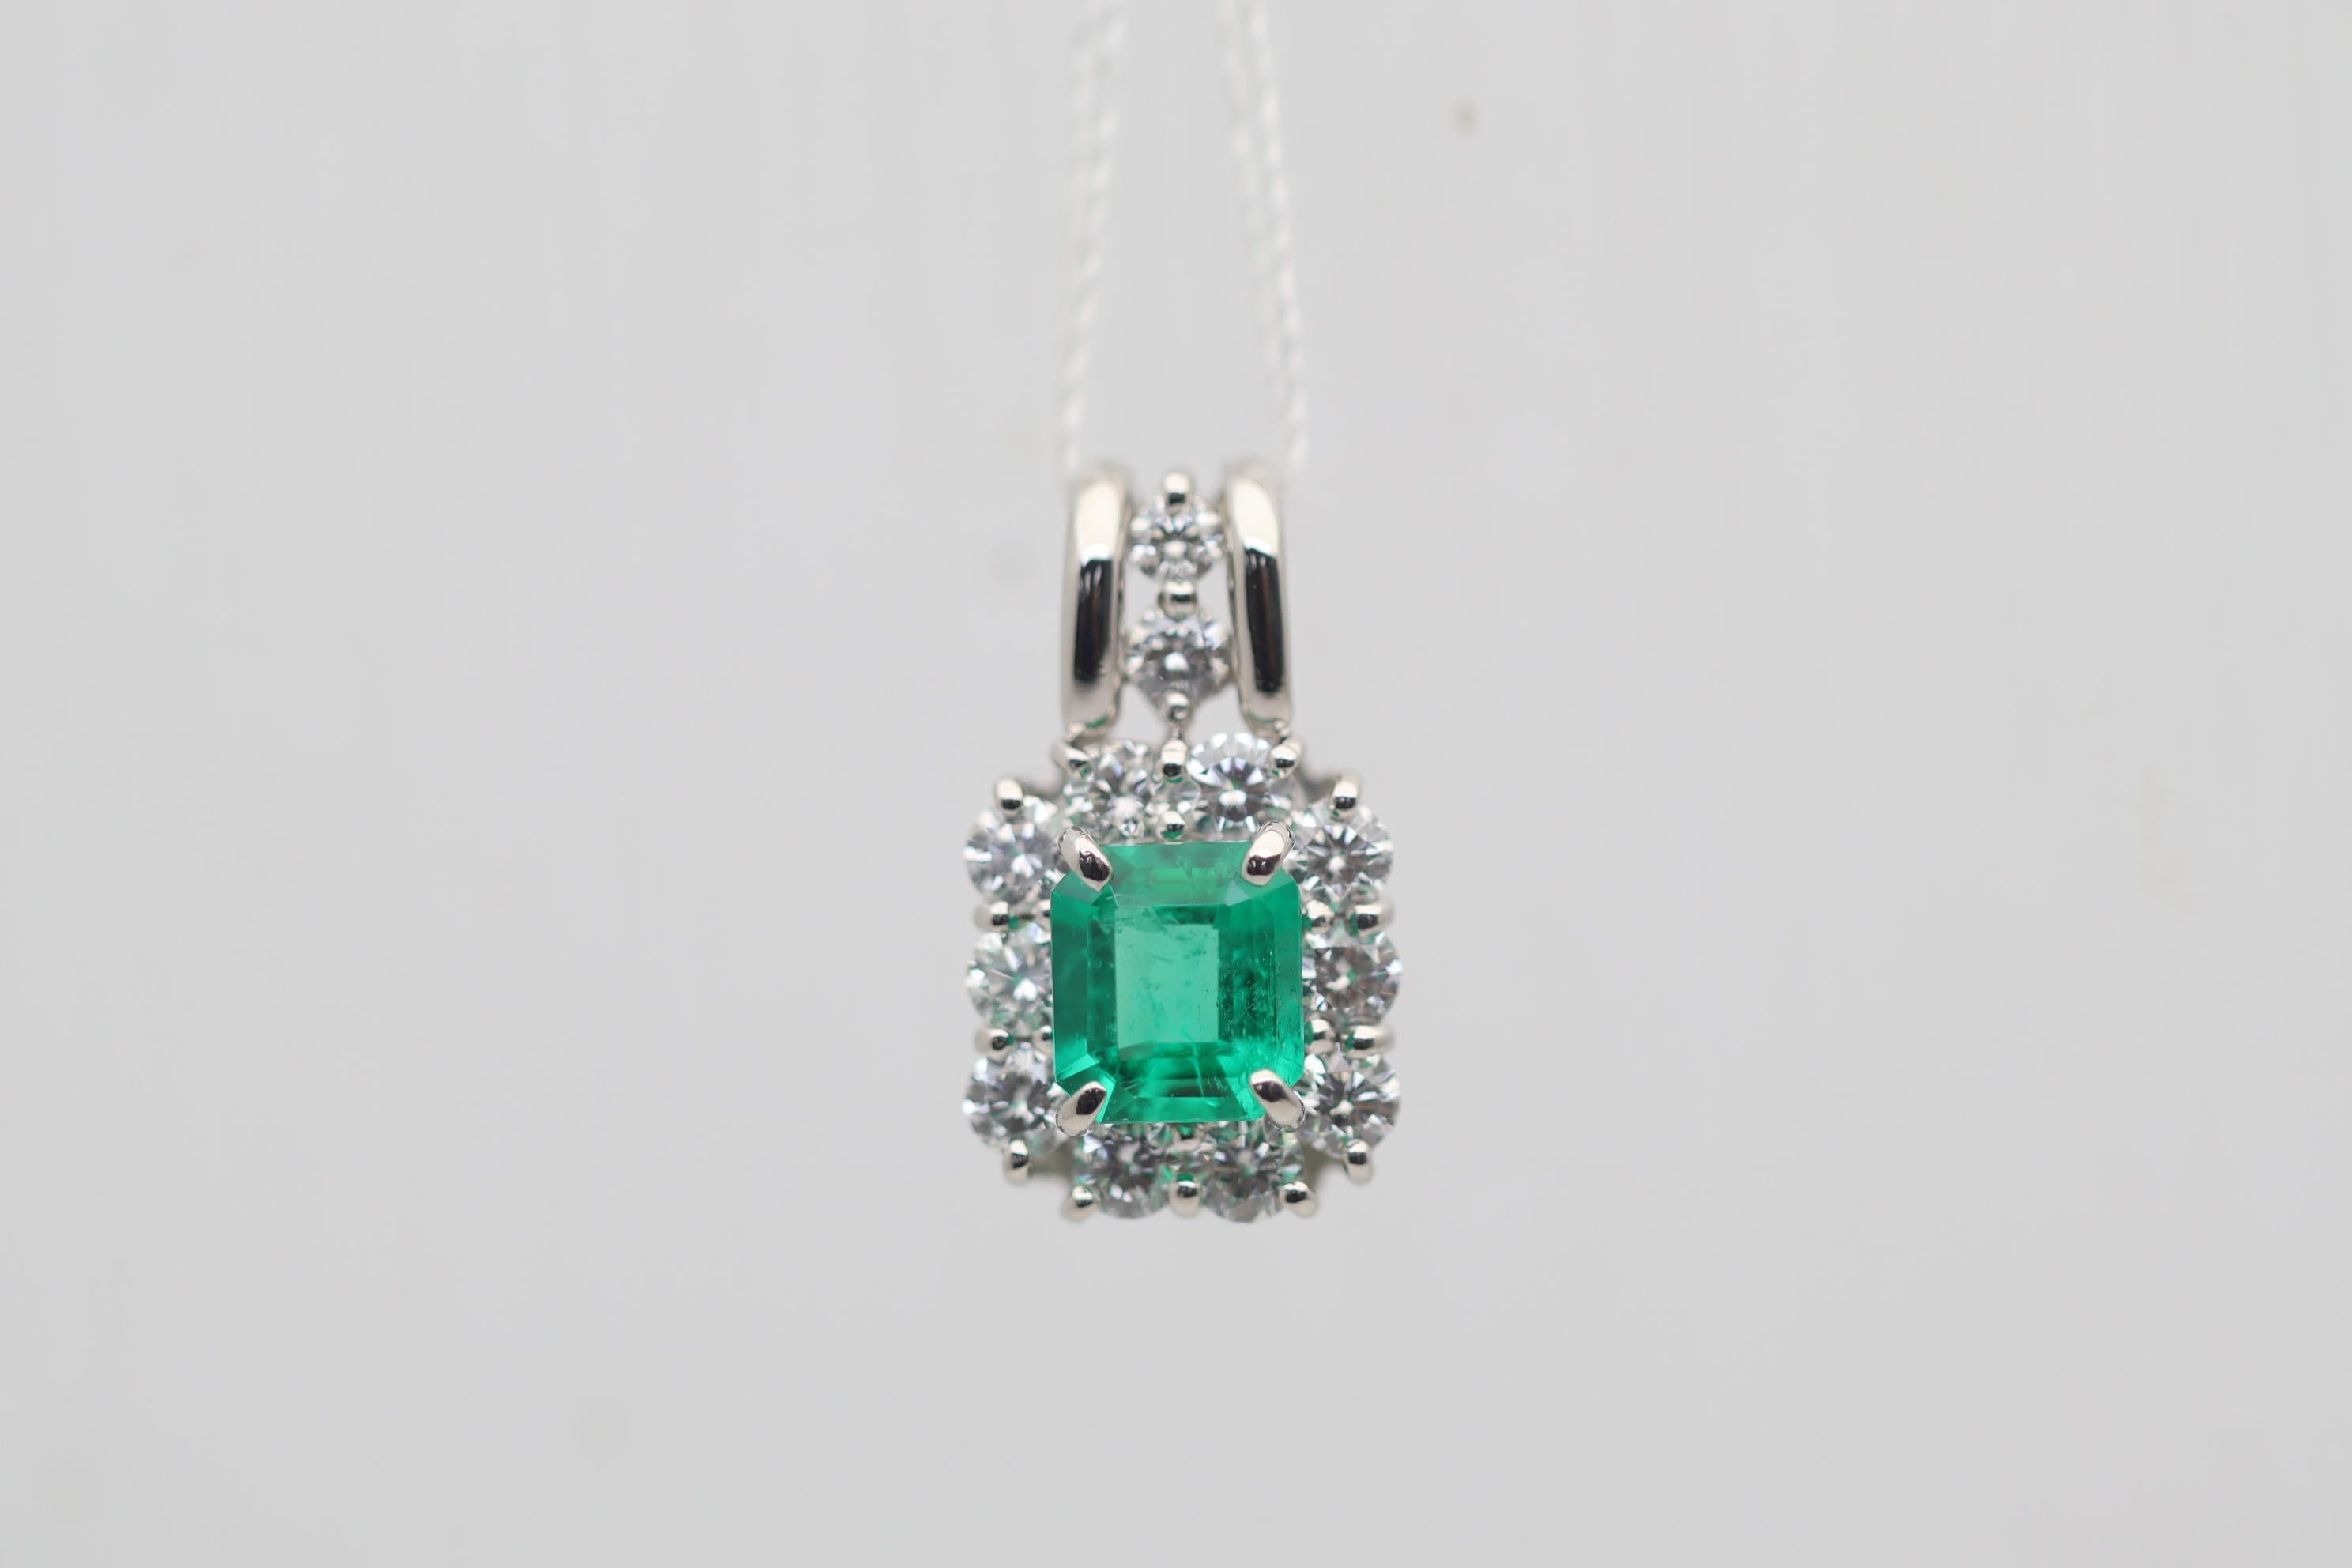 A lovely pendant with a fine gem-quality emerald in the center. The emerald weighs 0.75 carats and has a rich and bright vivid green color which is just so fine and pleasing to the eye. It is complemented by 0.72 carats of round brilliant-cut